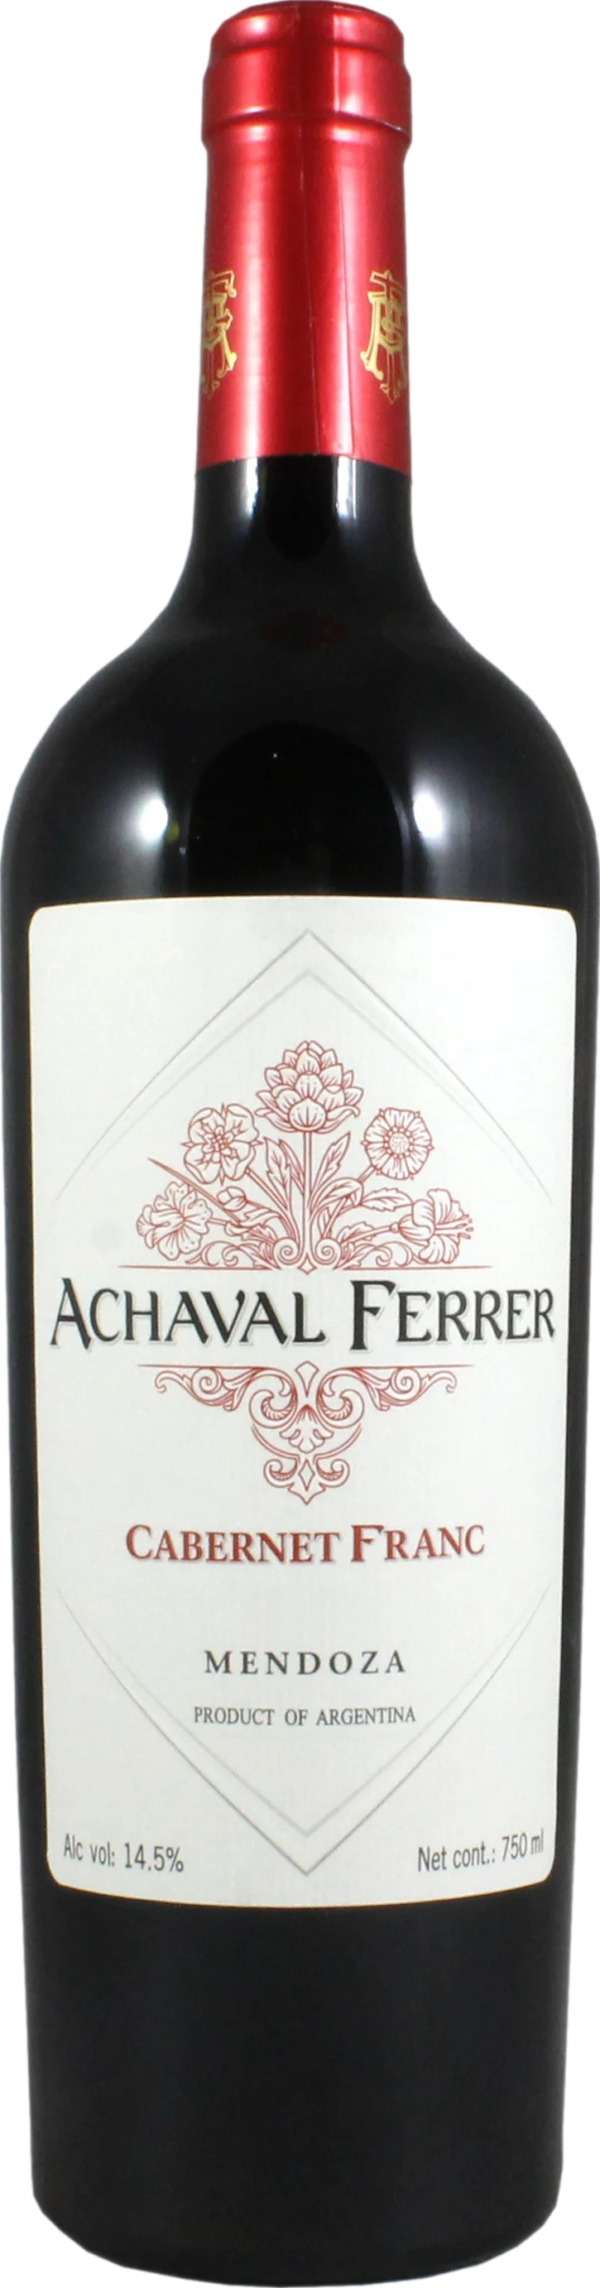 Product image of Achaval Ferrer Cabernet Franc 2019 from 8wines